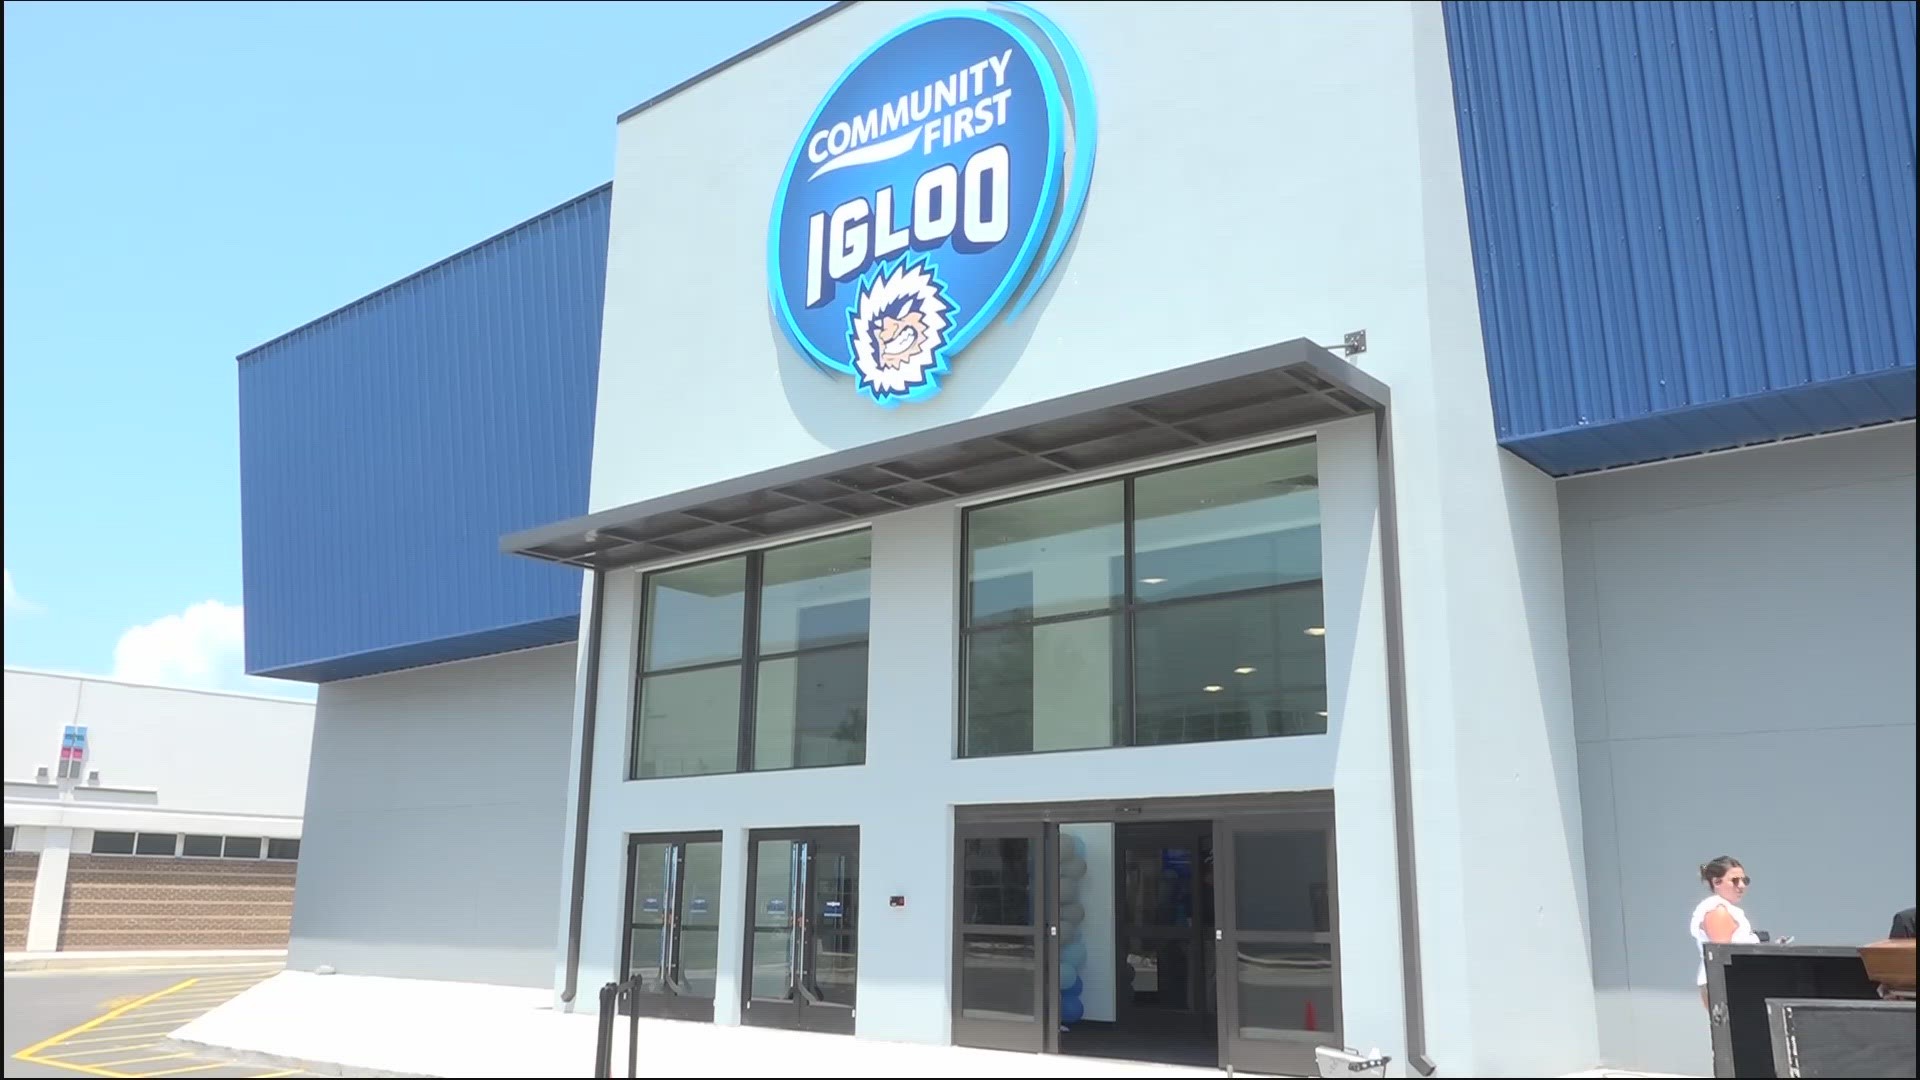 The renovated Community First Igloo is where the Icemen practice during the season. It has two NHL-regulation ice rinks, a team shop, sports bar and Esports lounge.